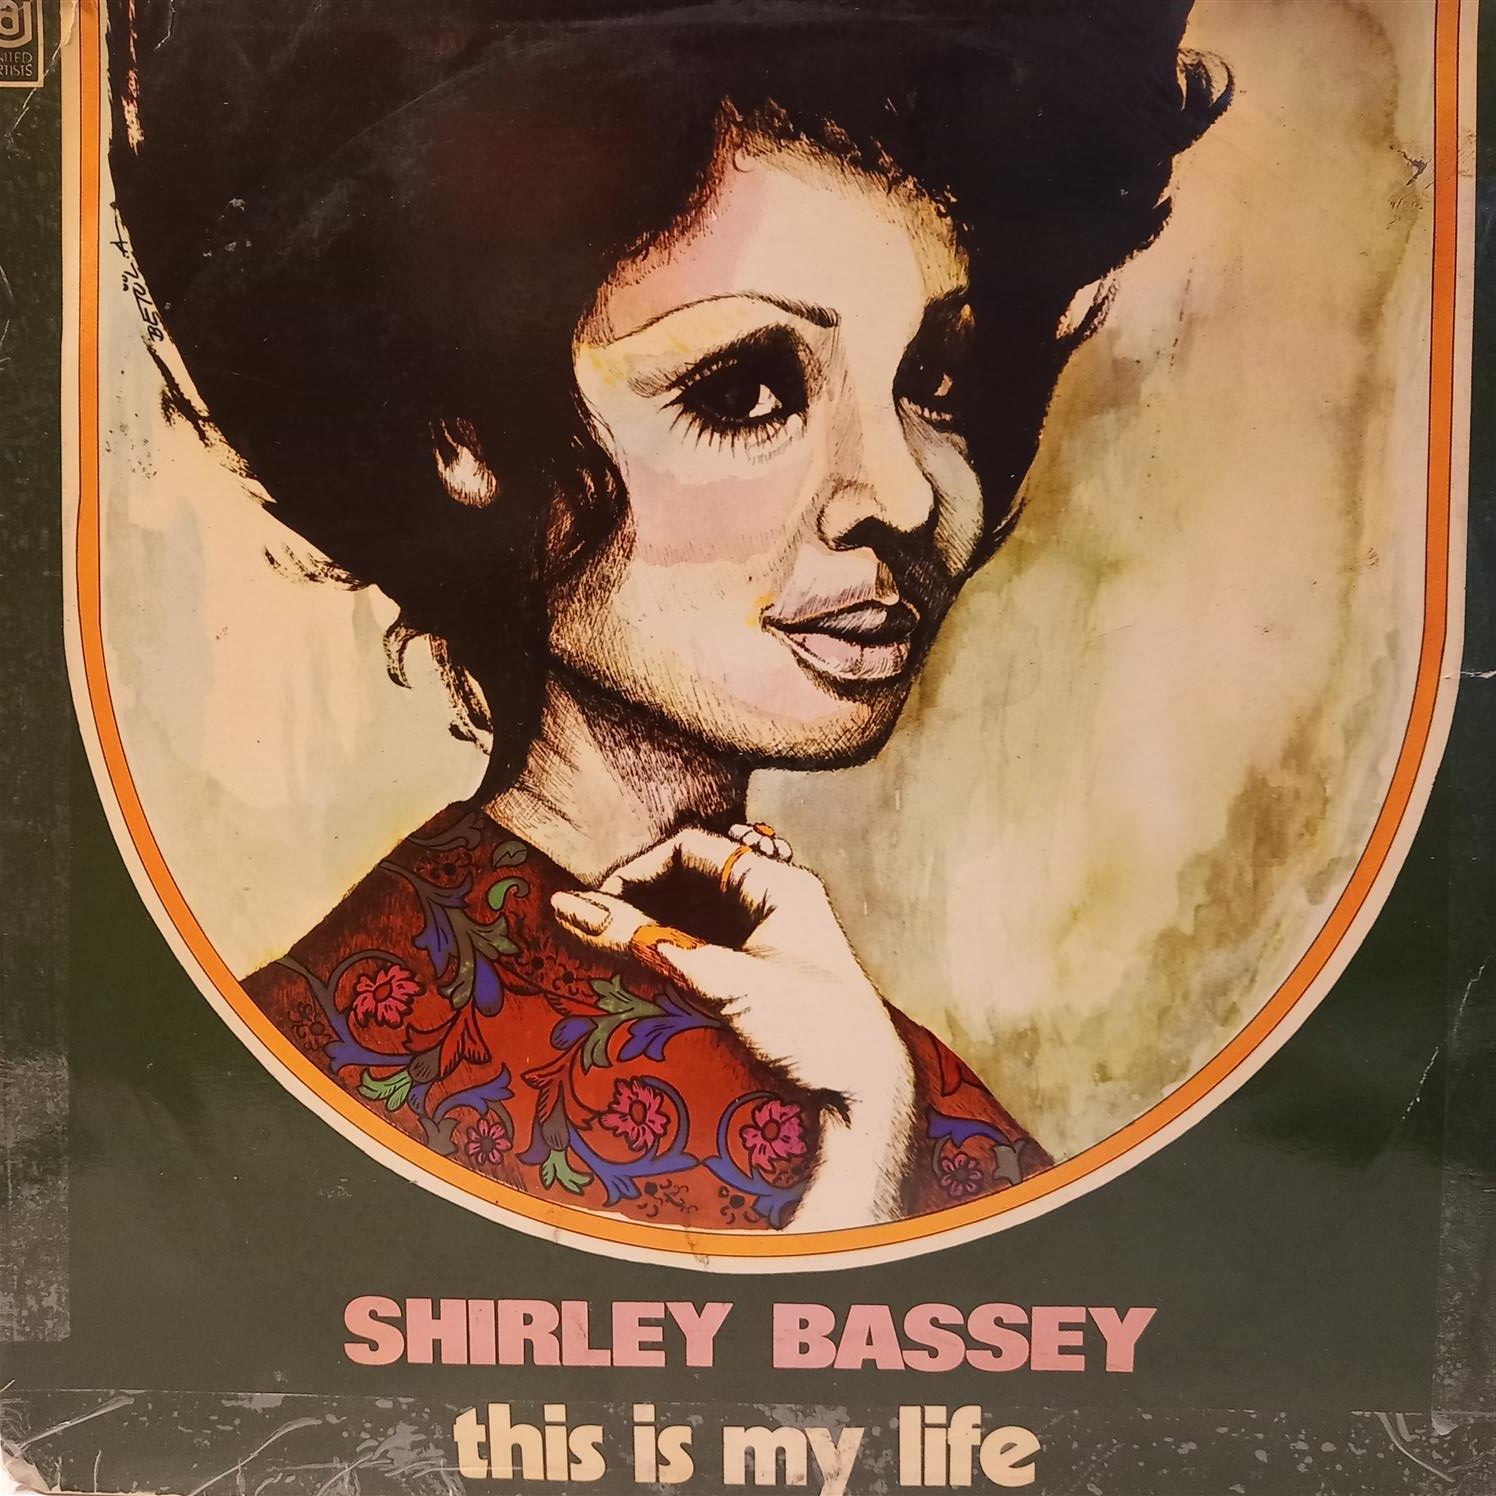 SHIRLEY BASSEY – THIS IS MY LIFE ON